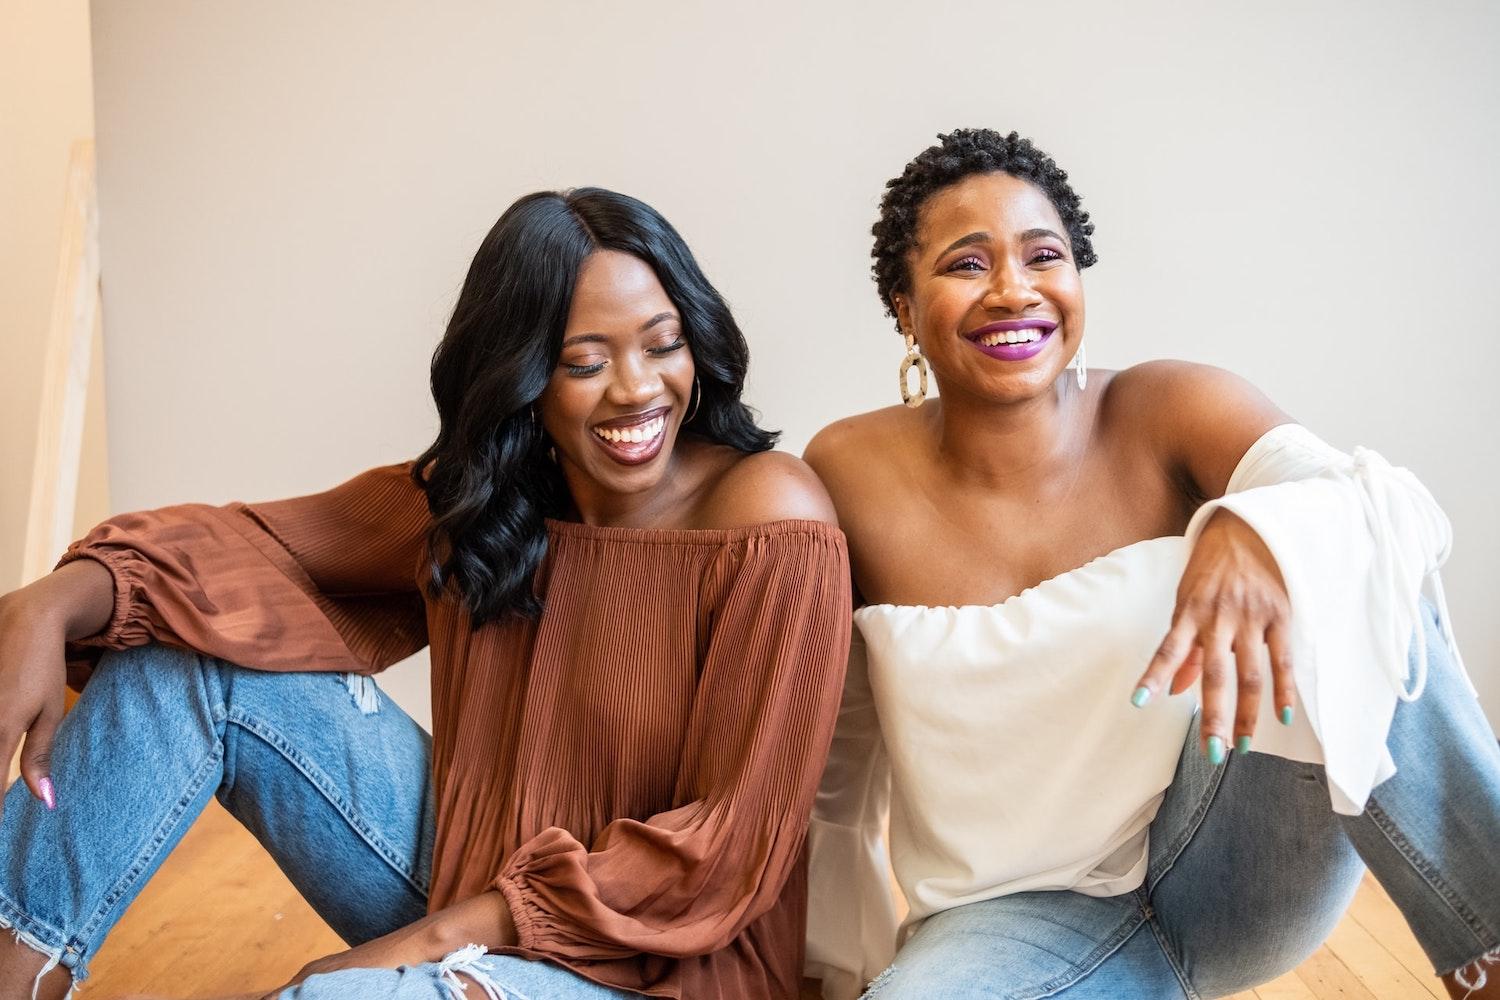 Two Black Women Friends - Support Black Women - Intersectionality at Work